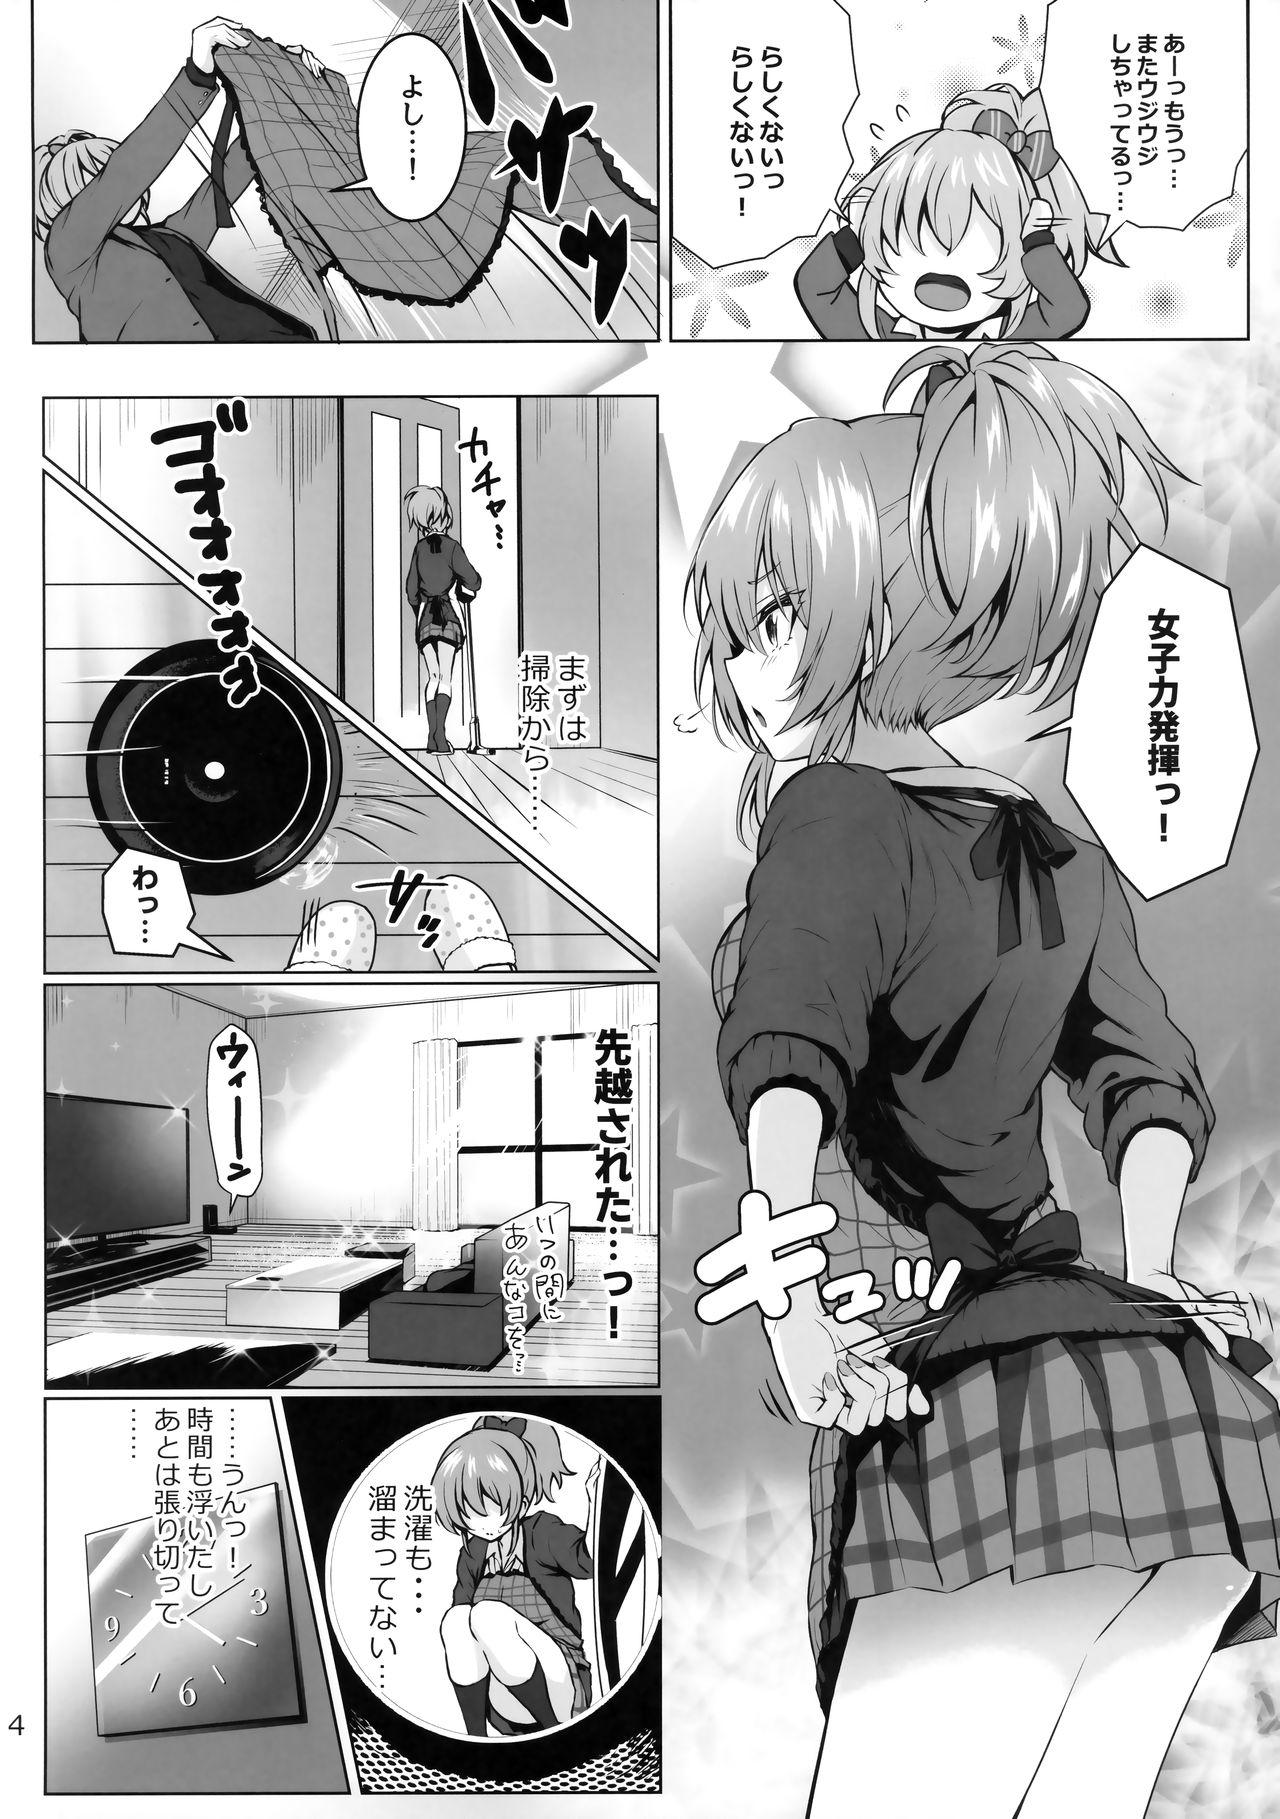 Fishnets Mika and P++ - The idolmaster Gaystraight - Page 3